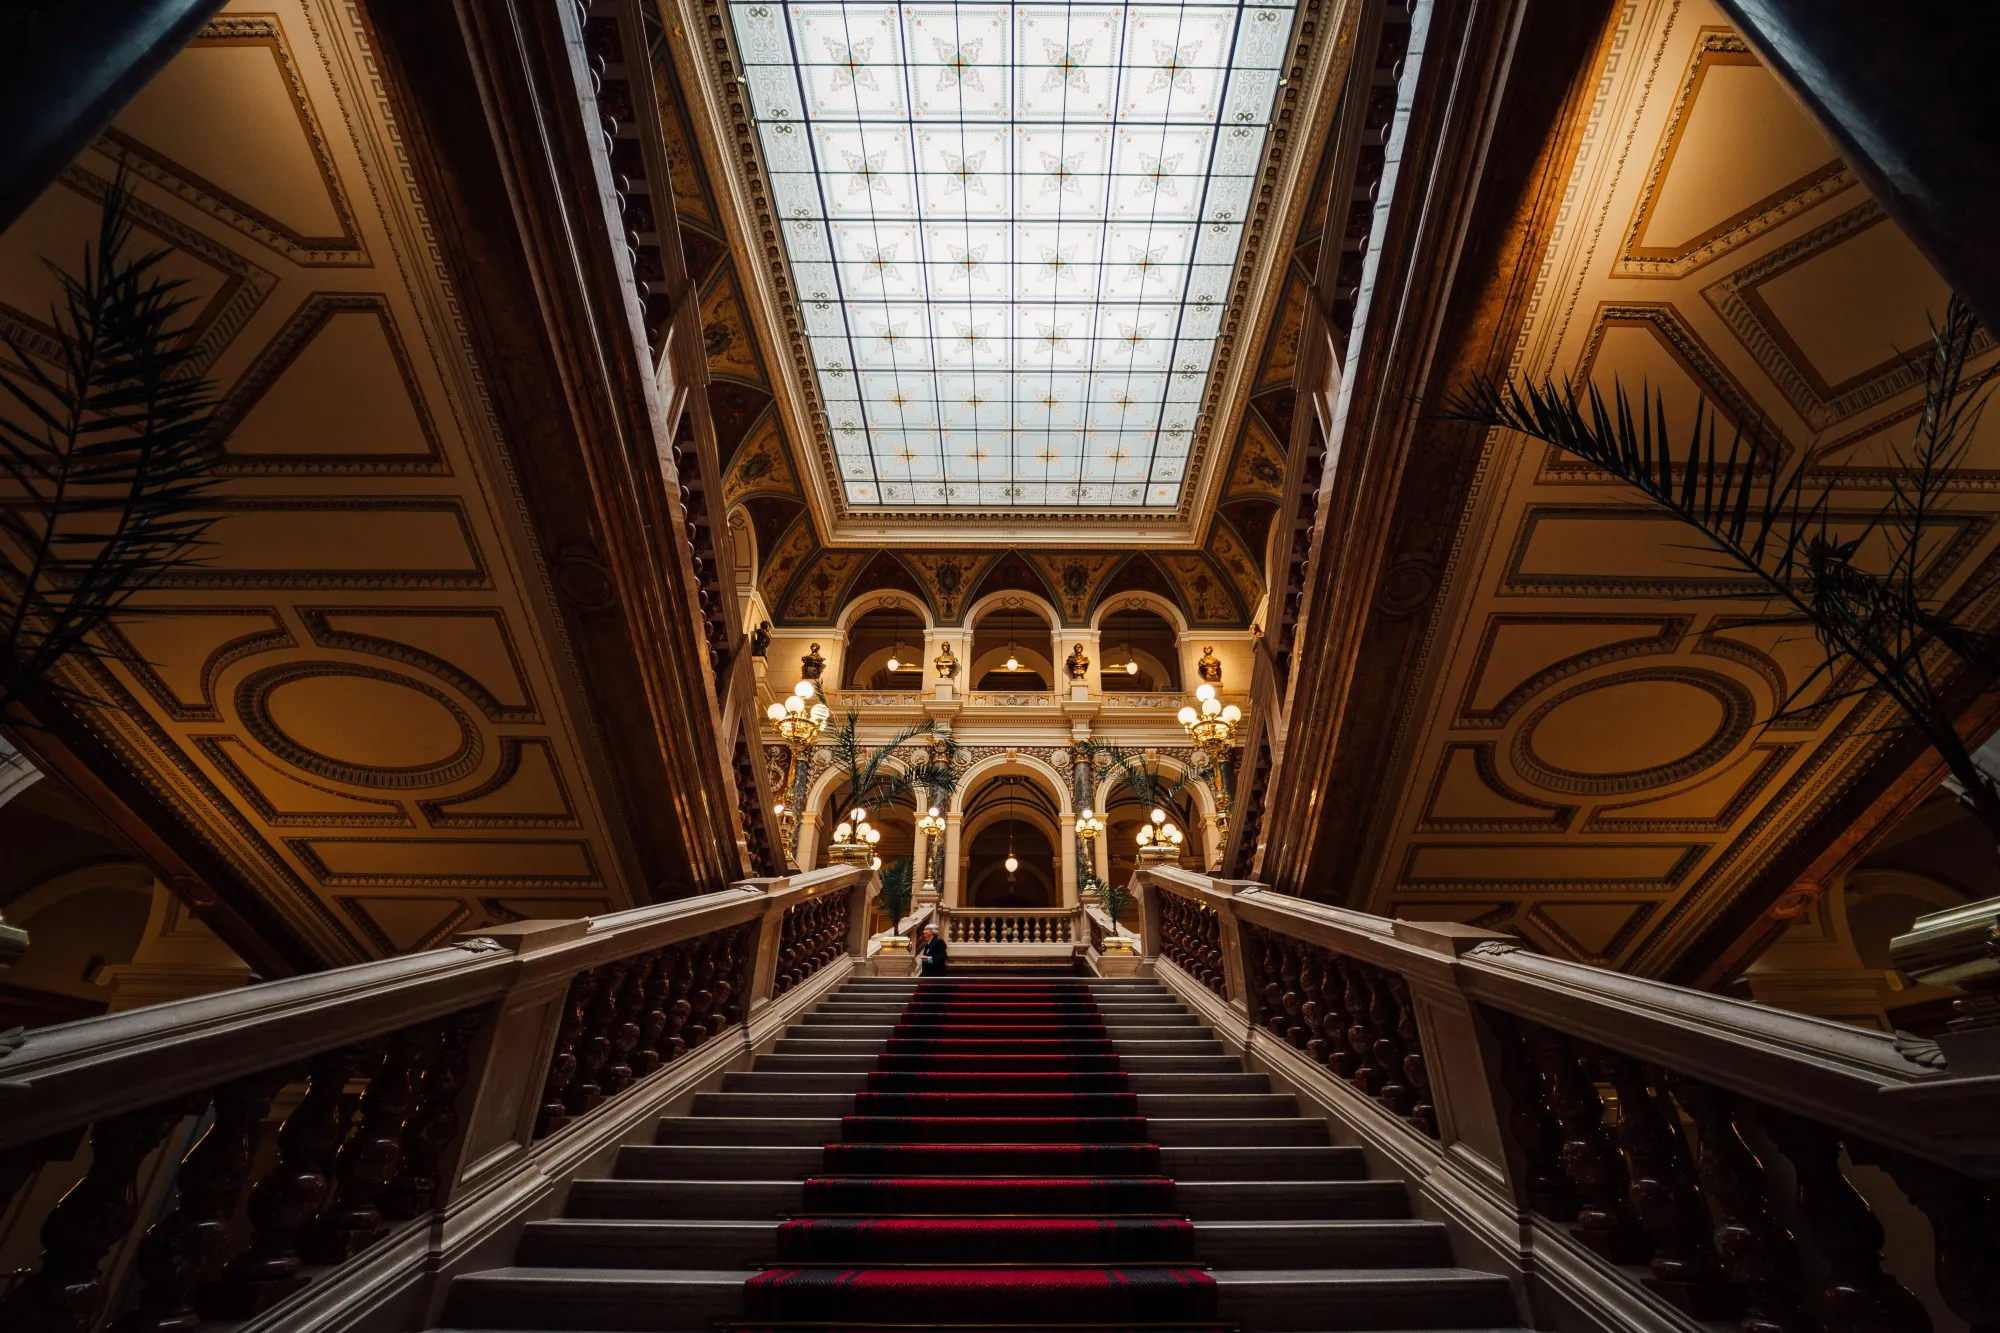 Image of a staircase of a building in Czech Republic